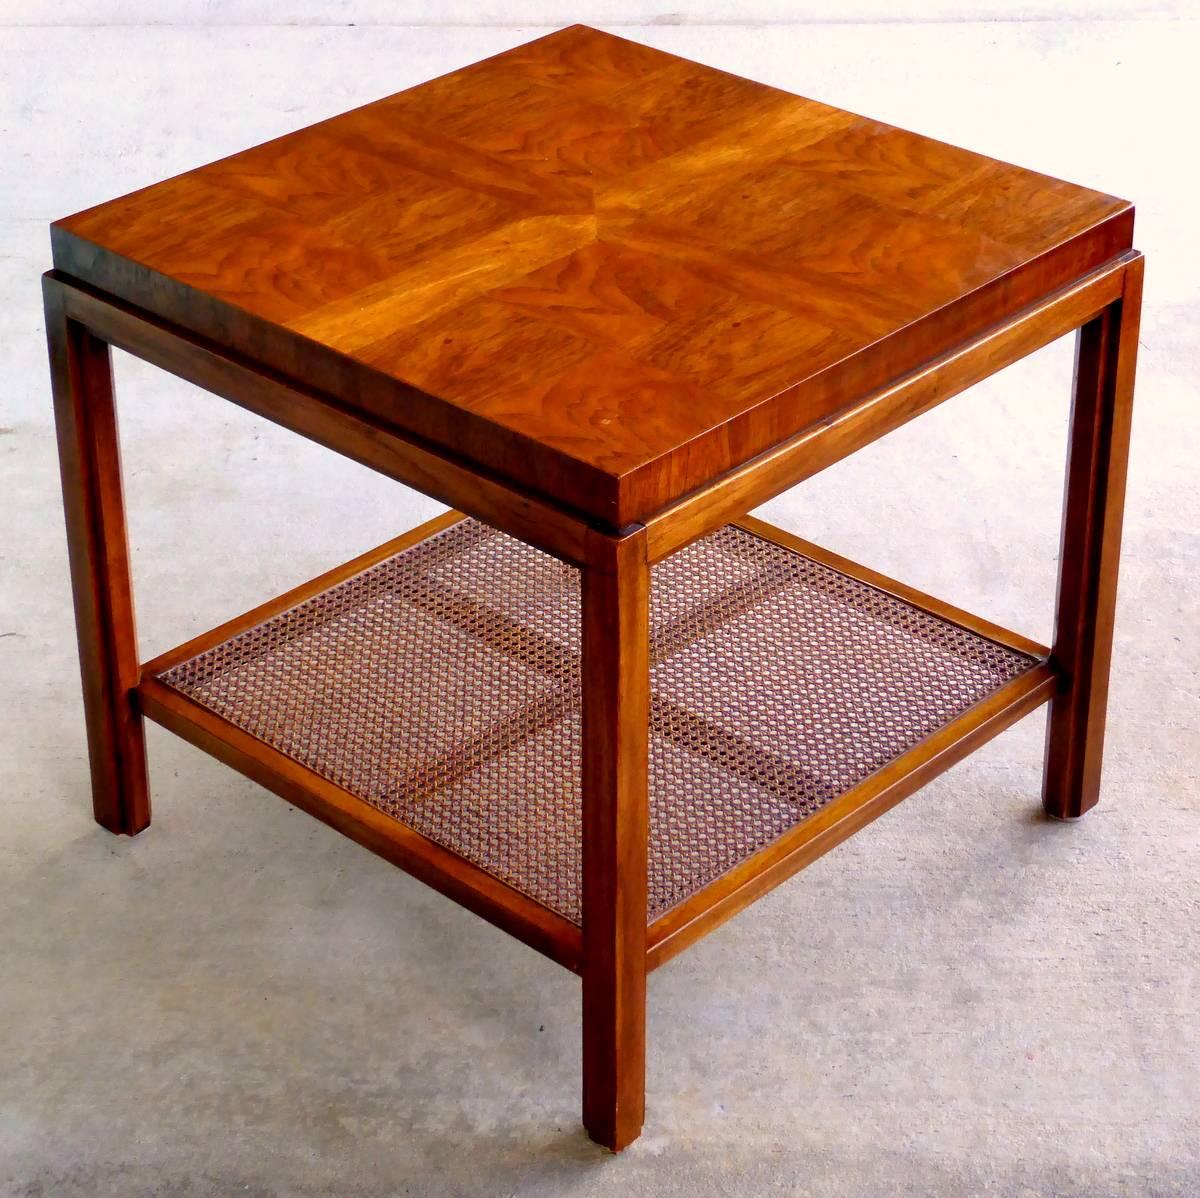 A lovely Consensus side table by Drexel in walnut with parquetry top and caned shelf. Marvelously well preserved.

A few important notes about all items available through this 1stdibs dealer:

1. We list all our items as being in 